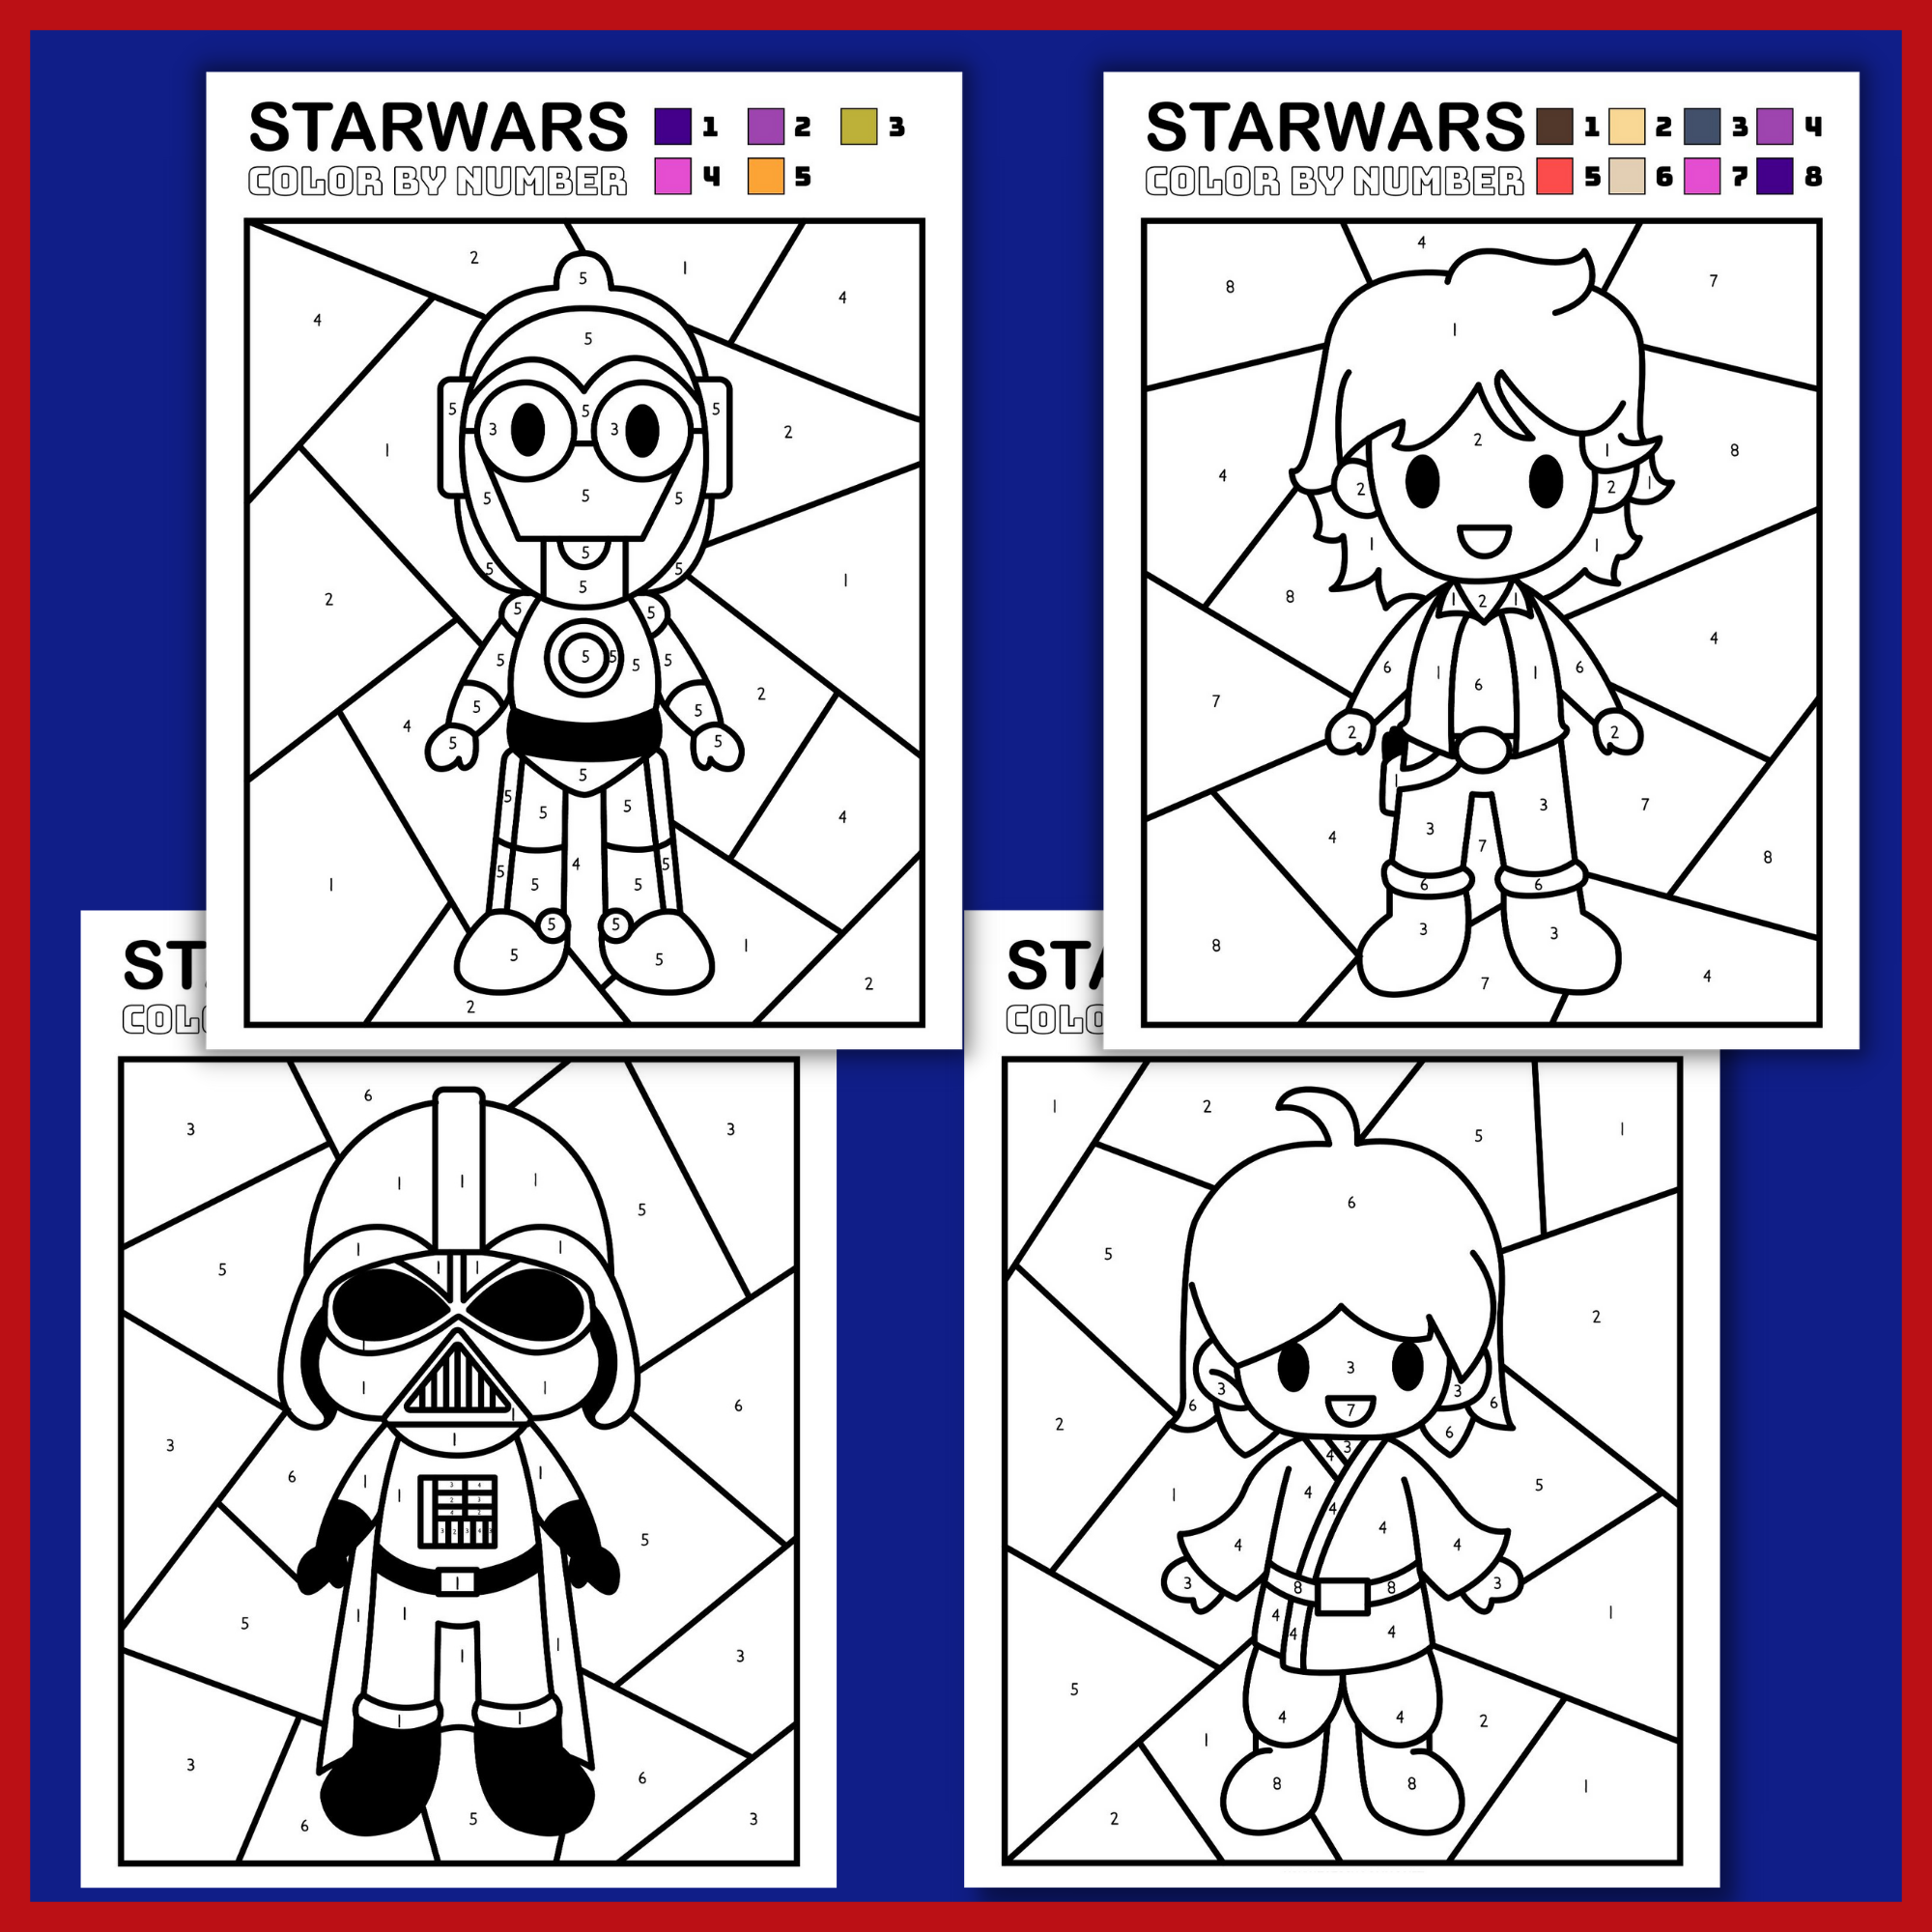 Star wars color by number sheets star wars day coloring pages made by teachers